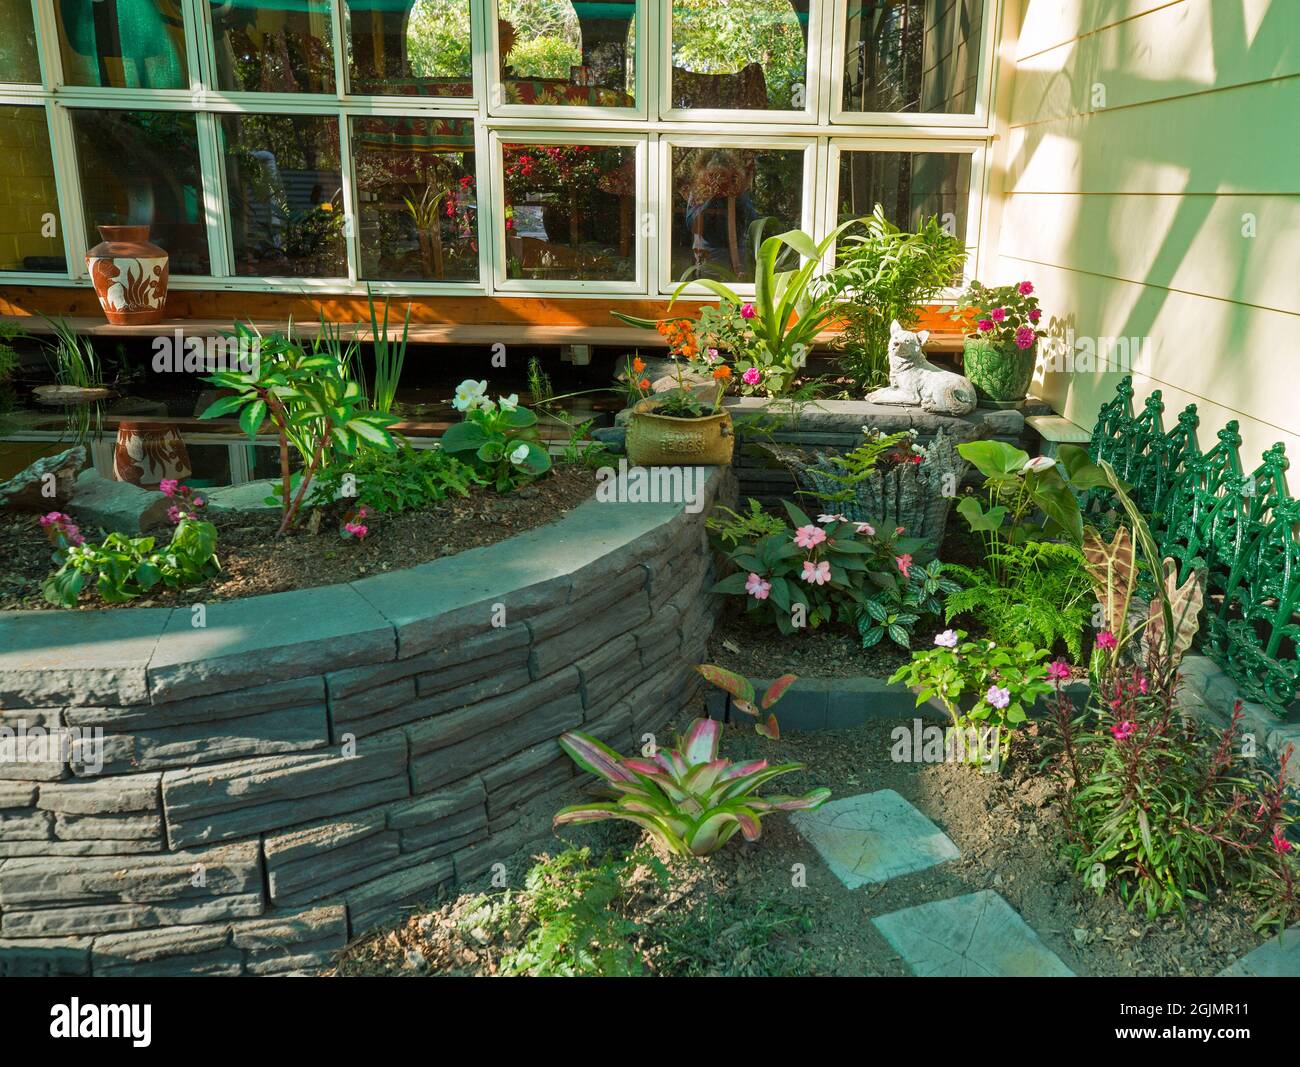 Garden with curved brick walls Stock Photo